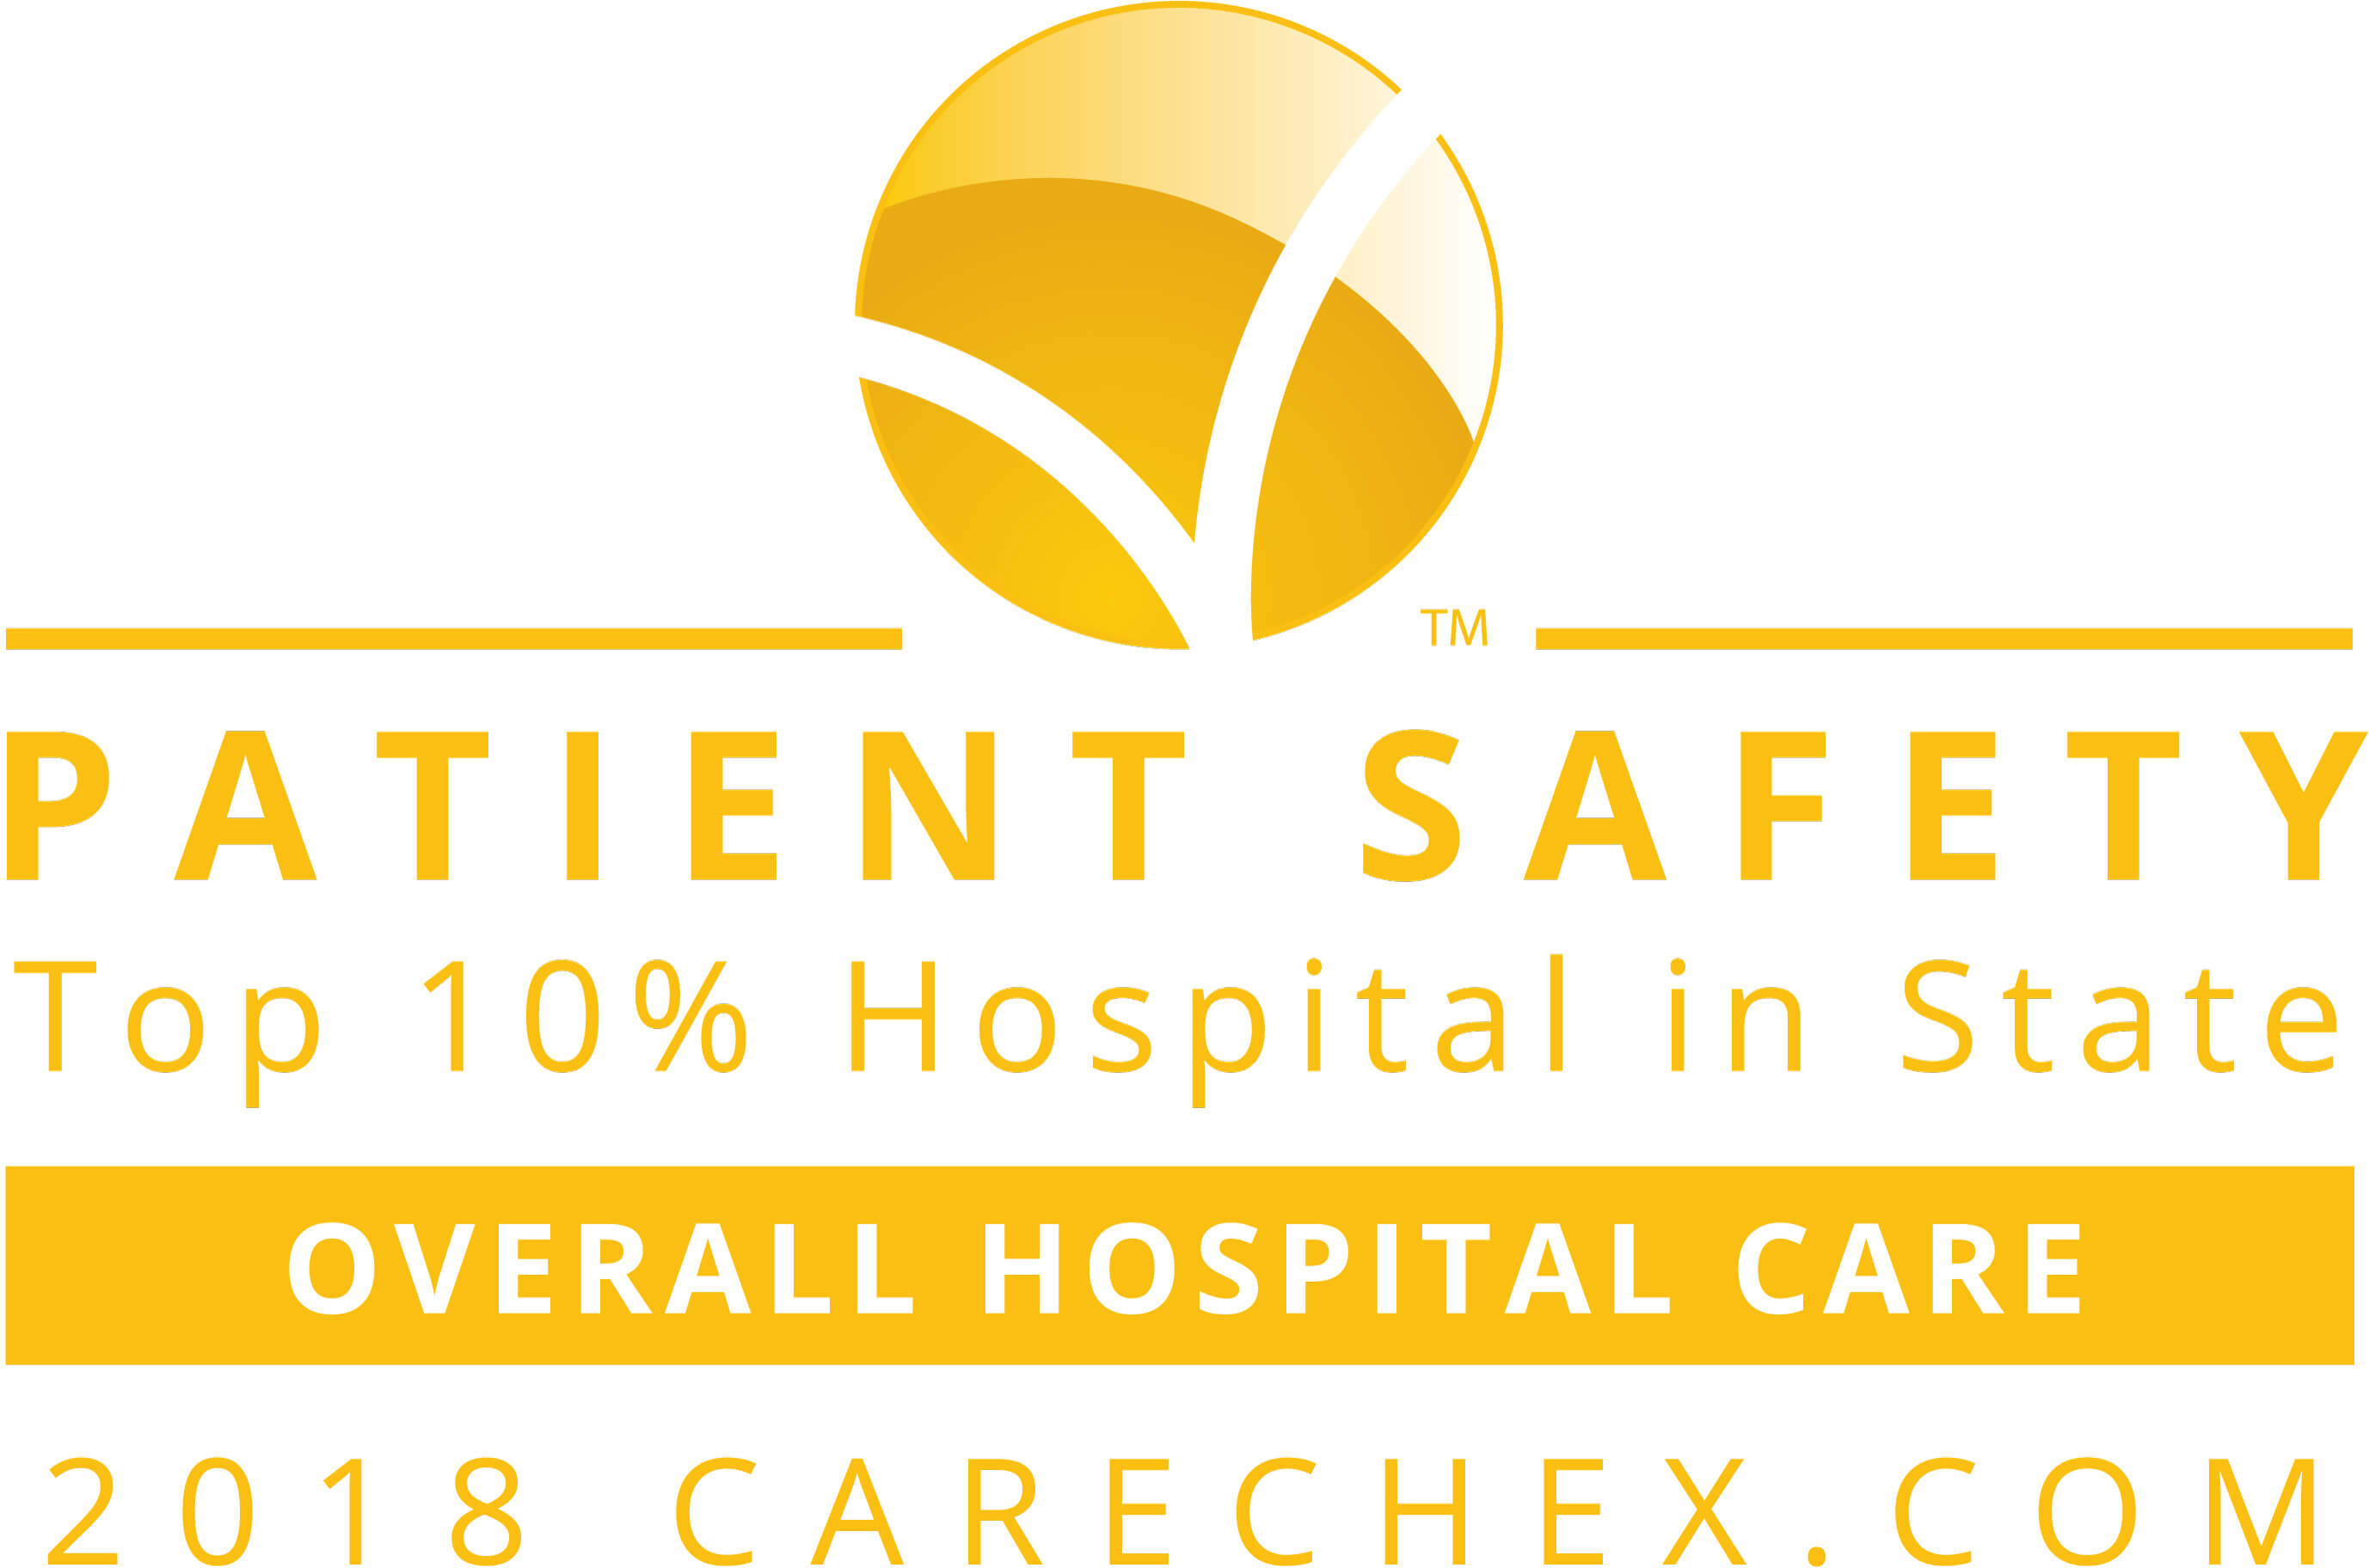 Top 10% State, Overall Hospital Care